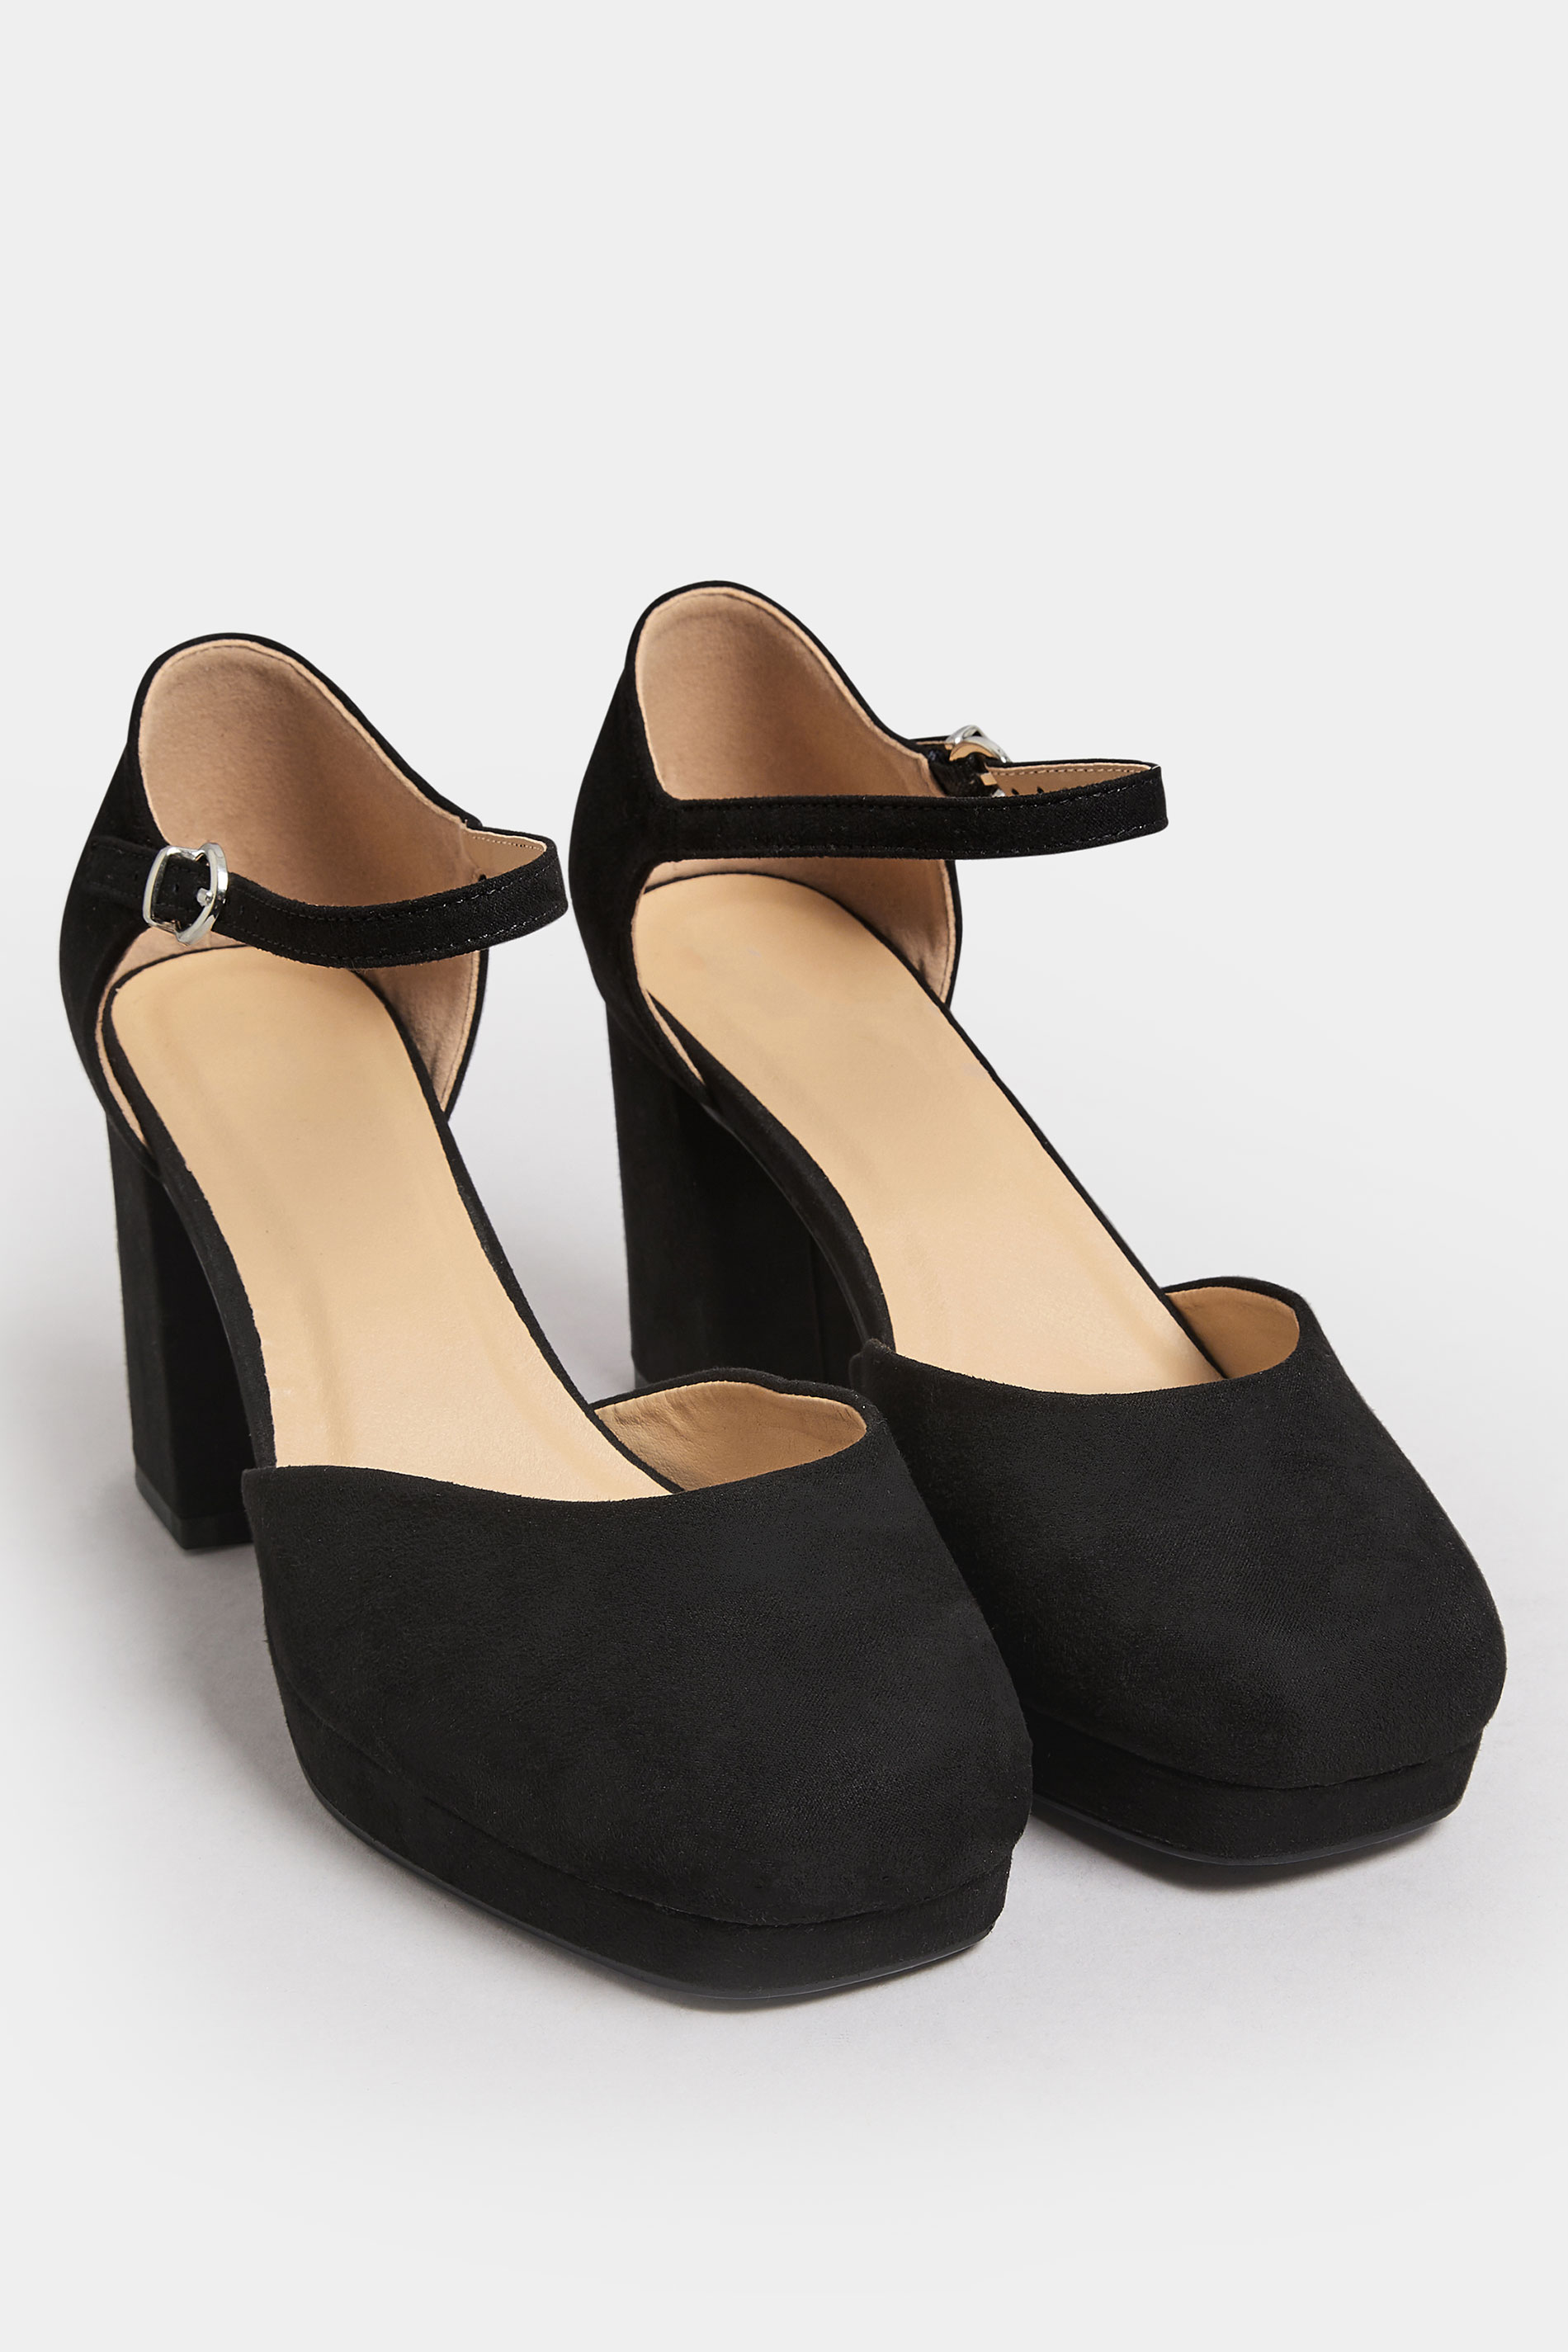 LIMITED COLLECTION Black Platform Court Shoes In Extra Wide EEE Fit | Yours Clothing 2